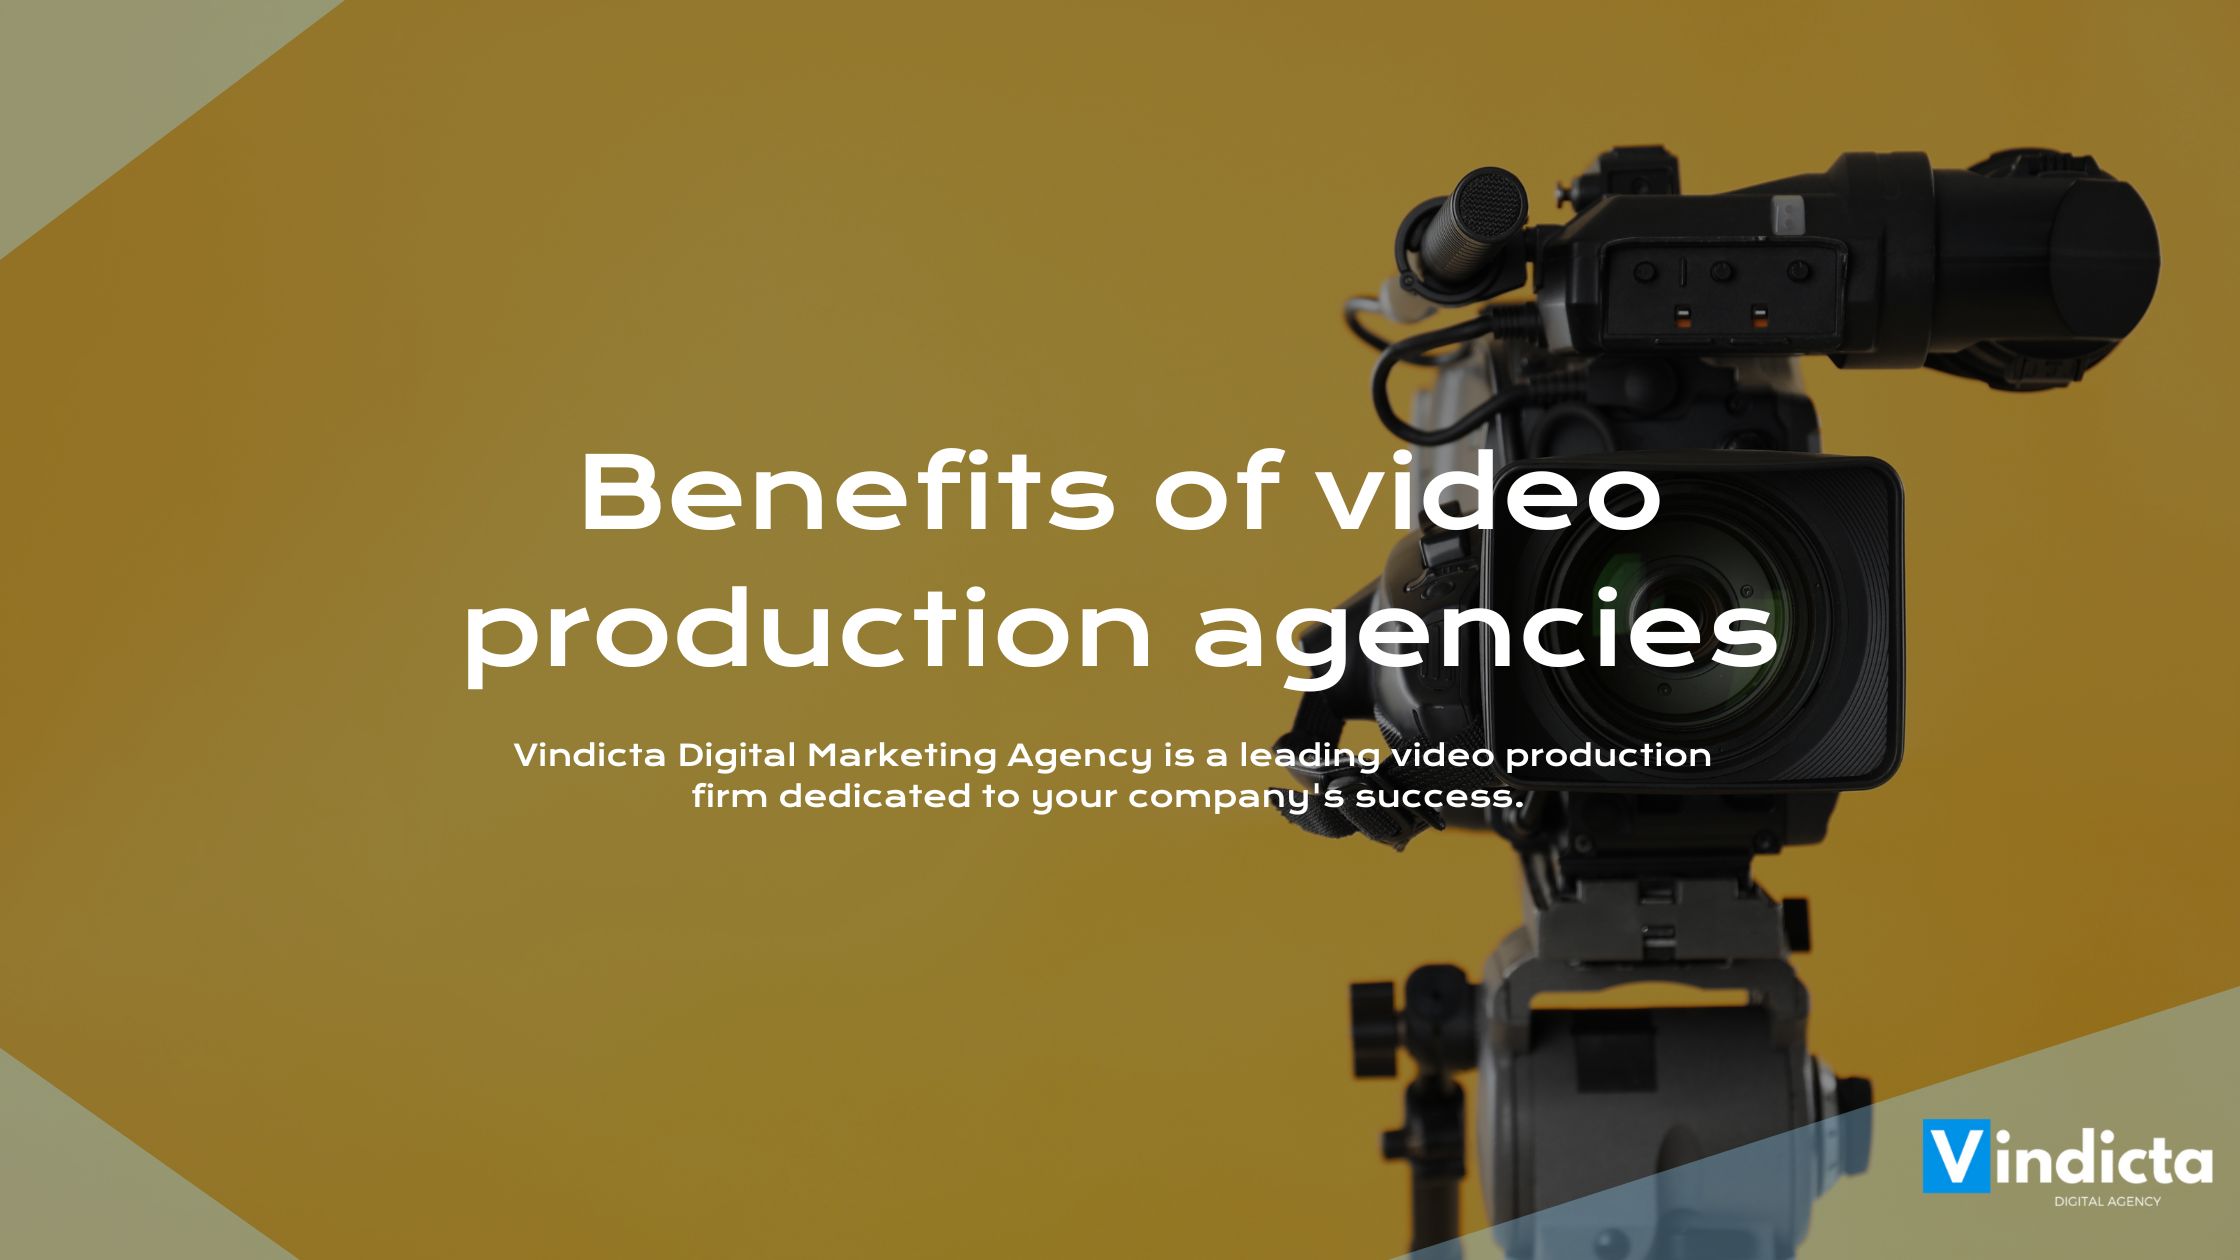 Benefits of video production agencies